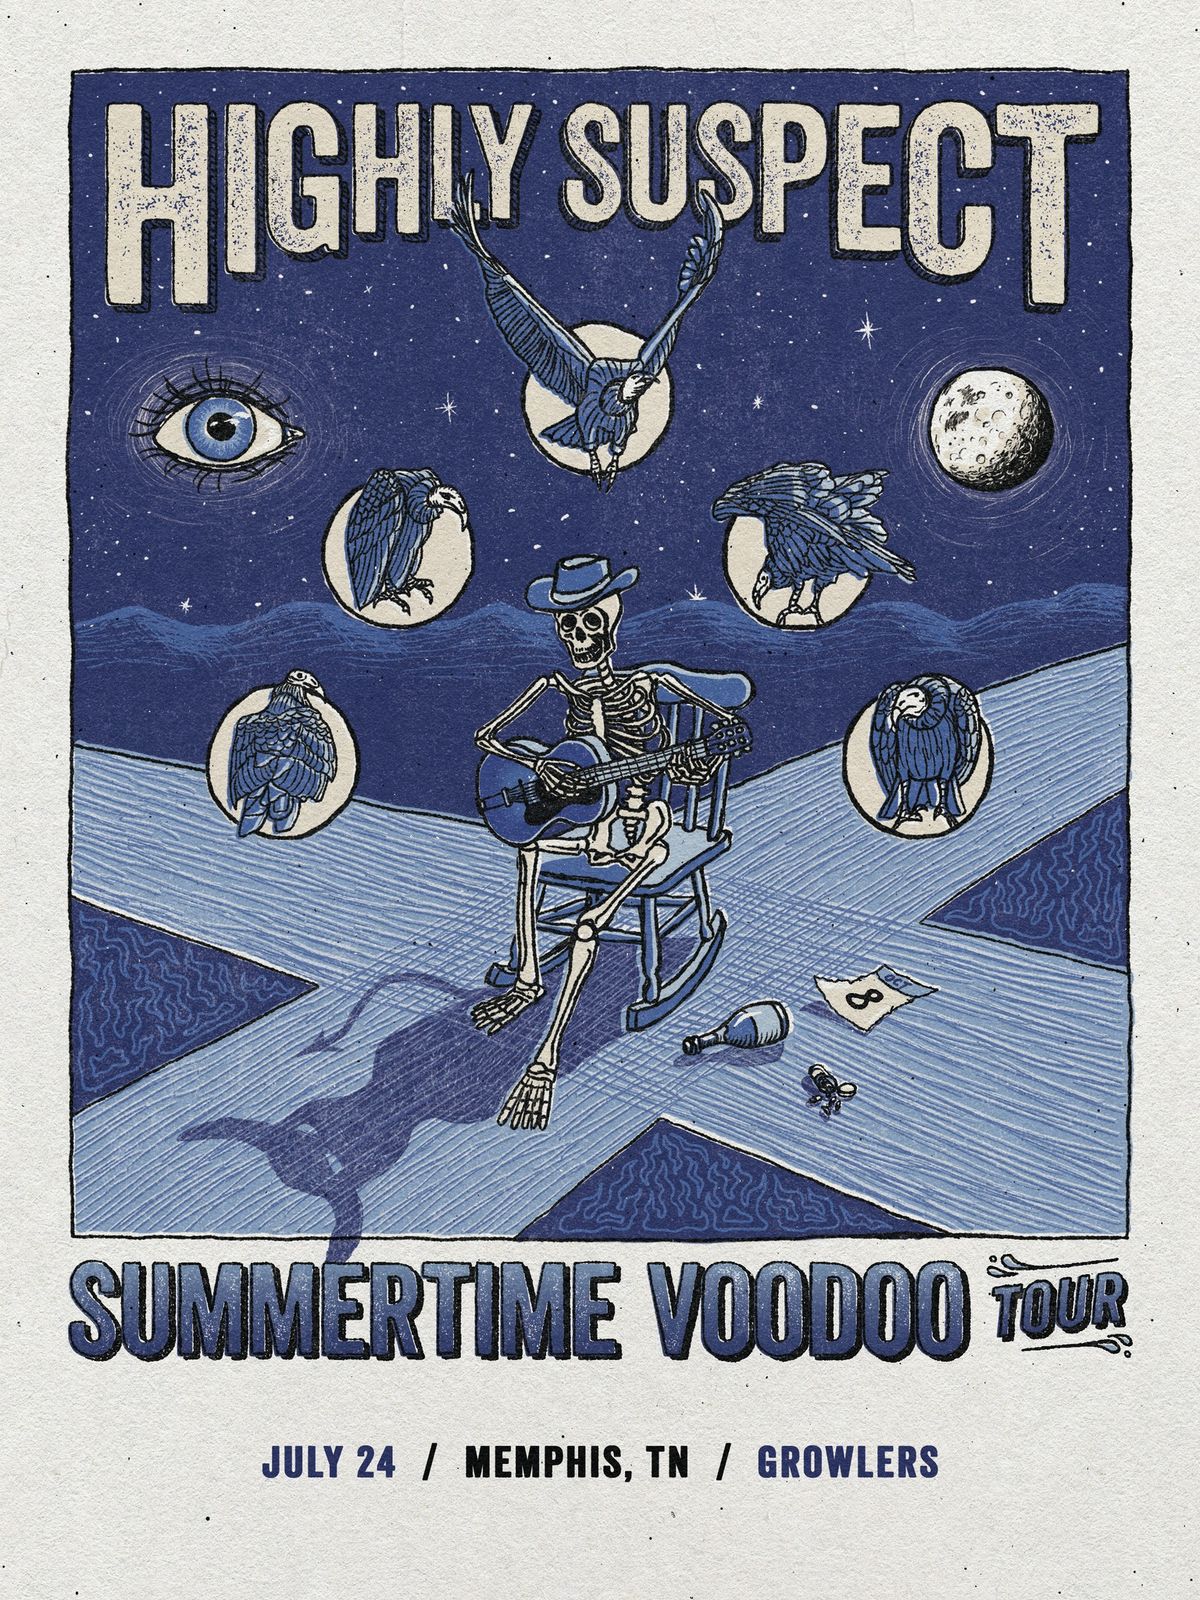 SOLD OUT Highly Suspect - Summertime Voodoo Tour at Growlers